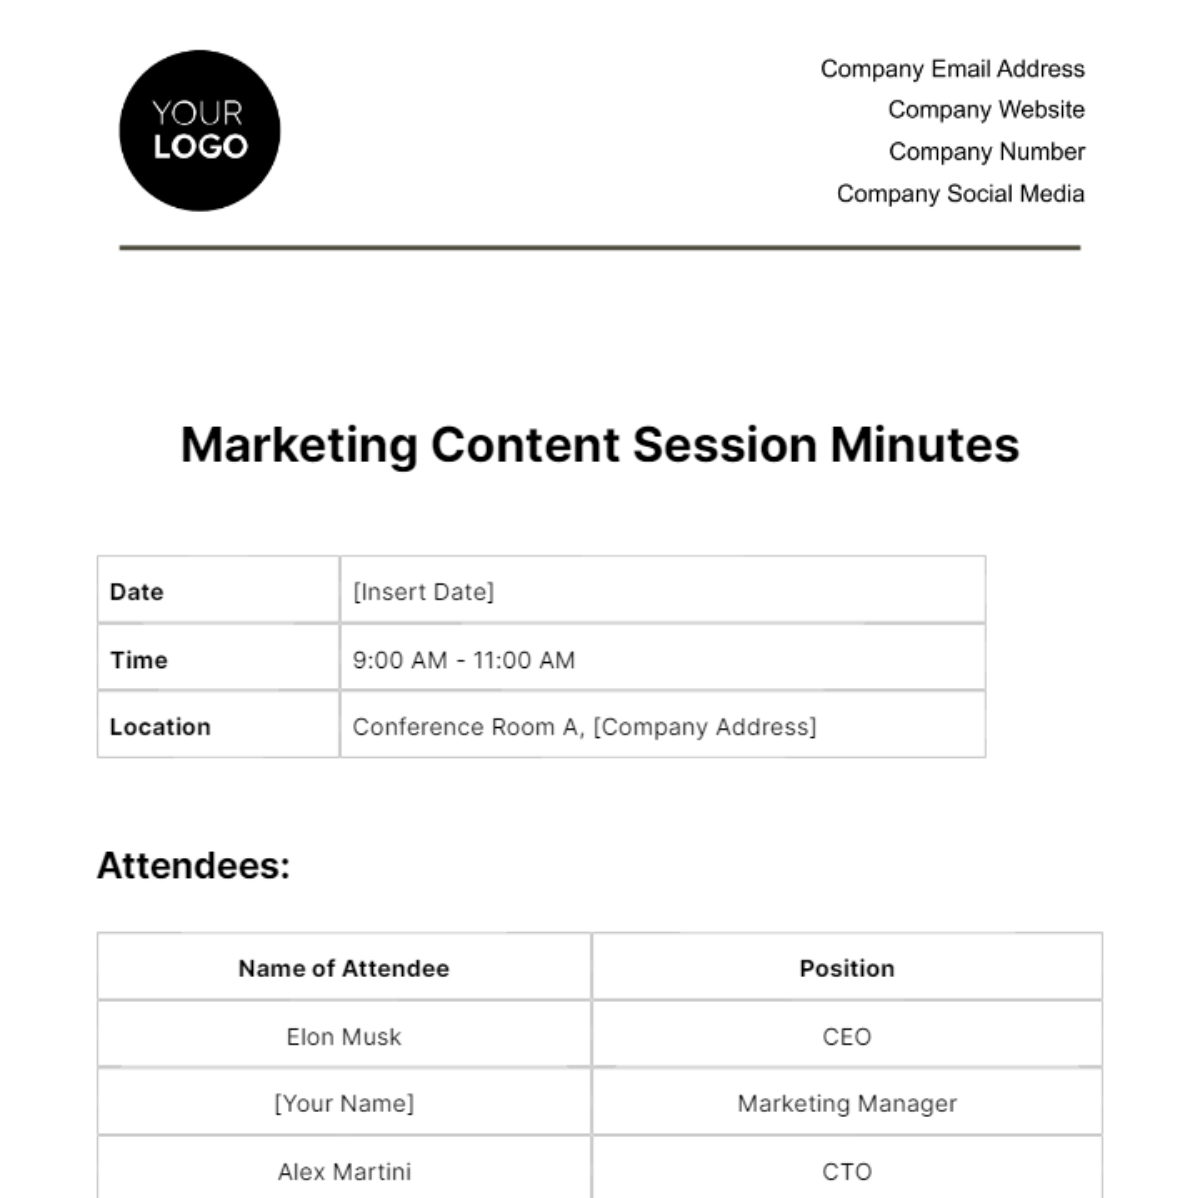 Marketing Content Session Minute Template